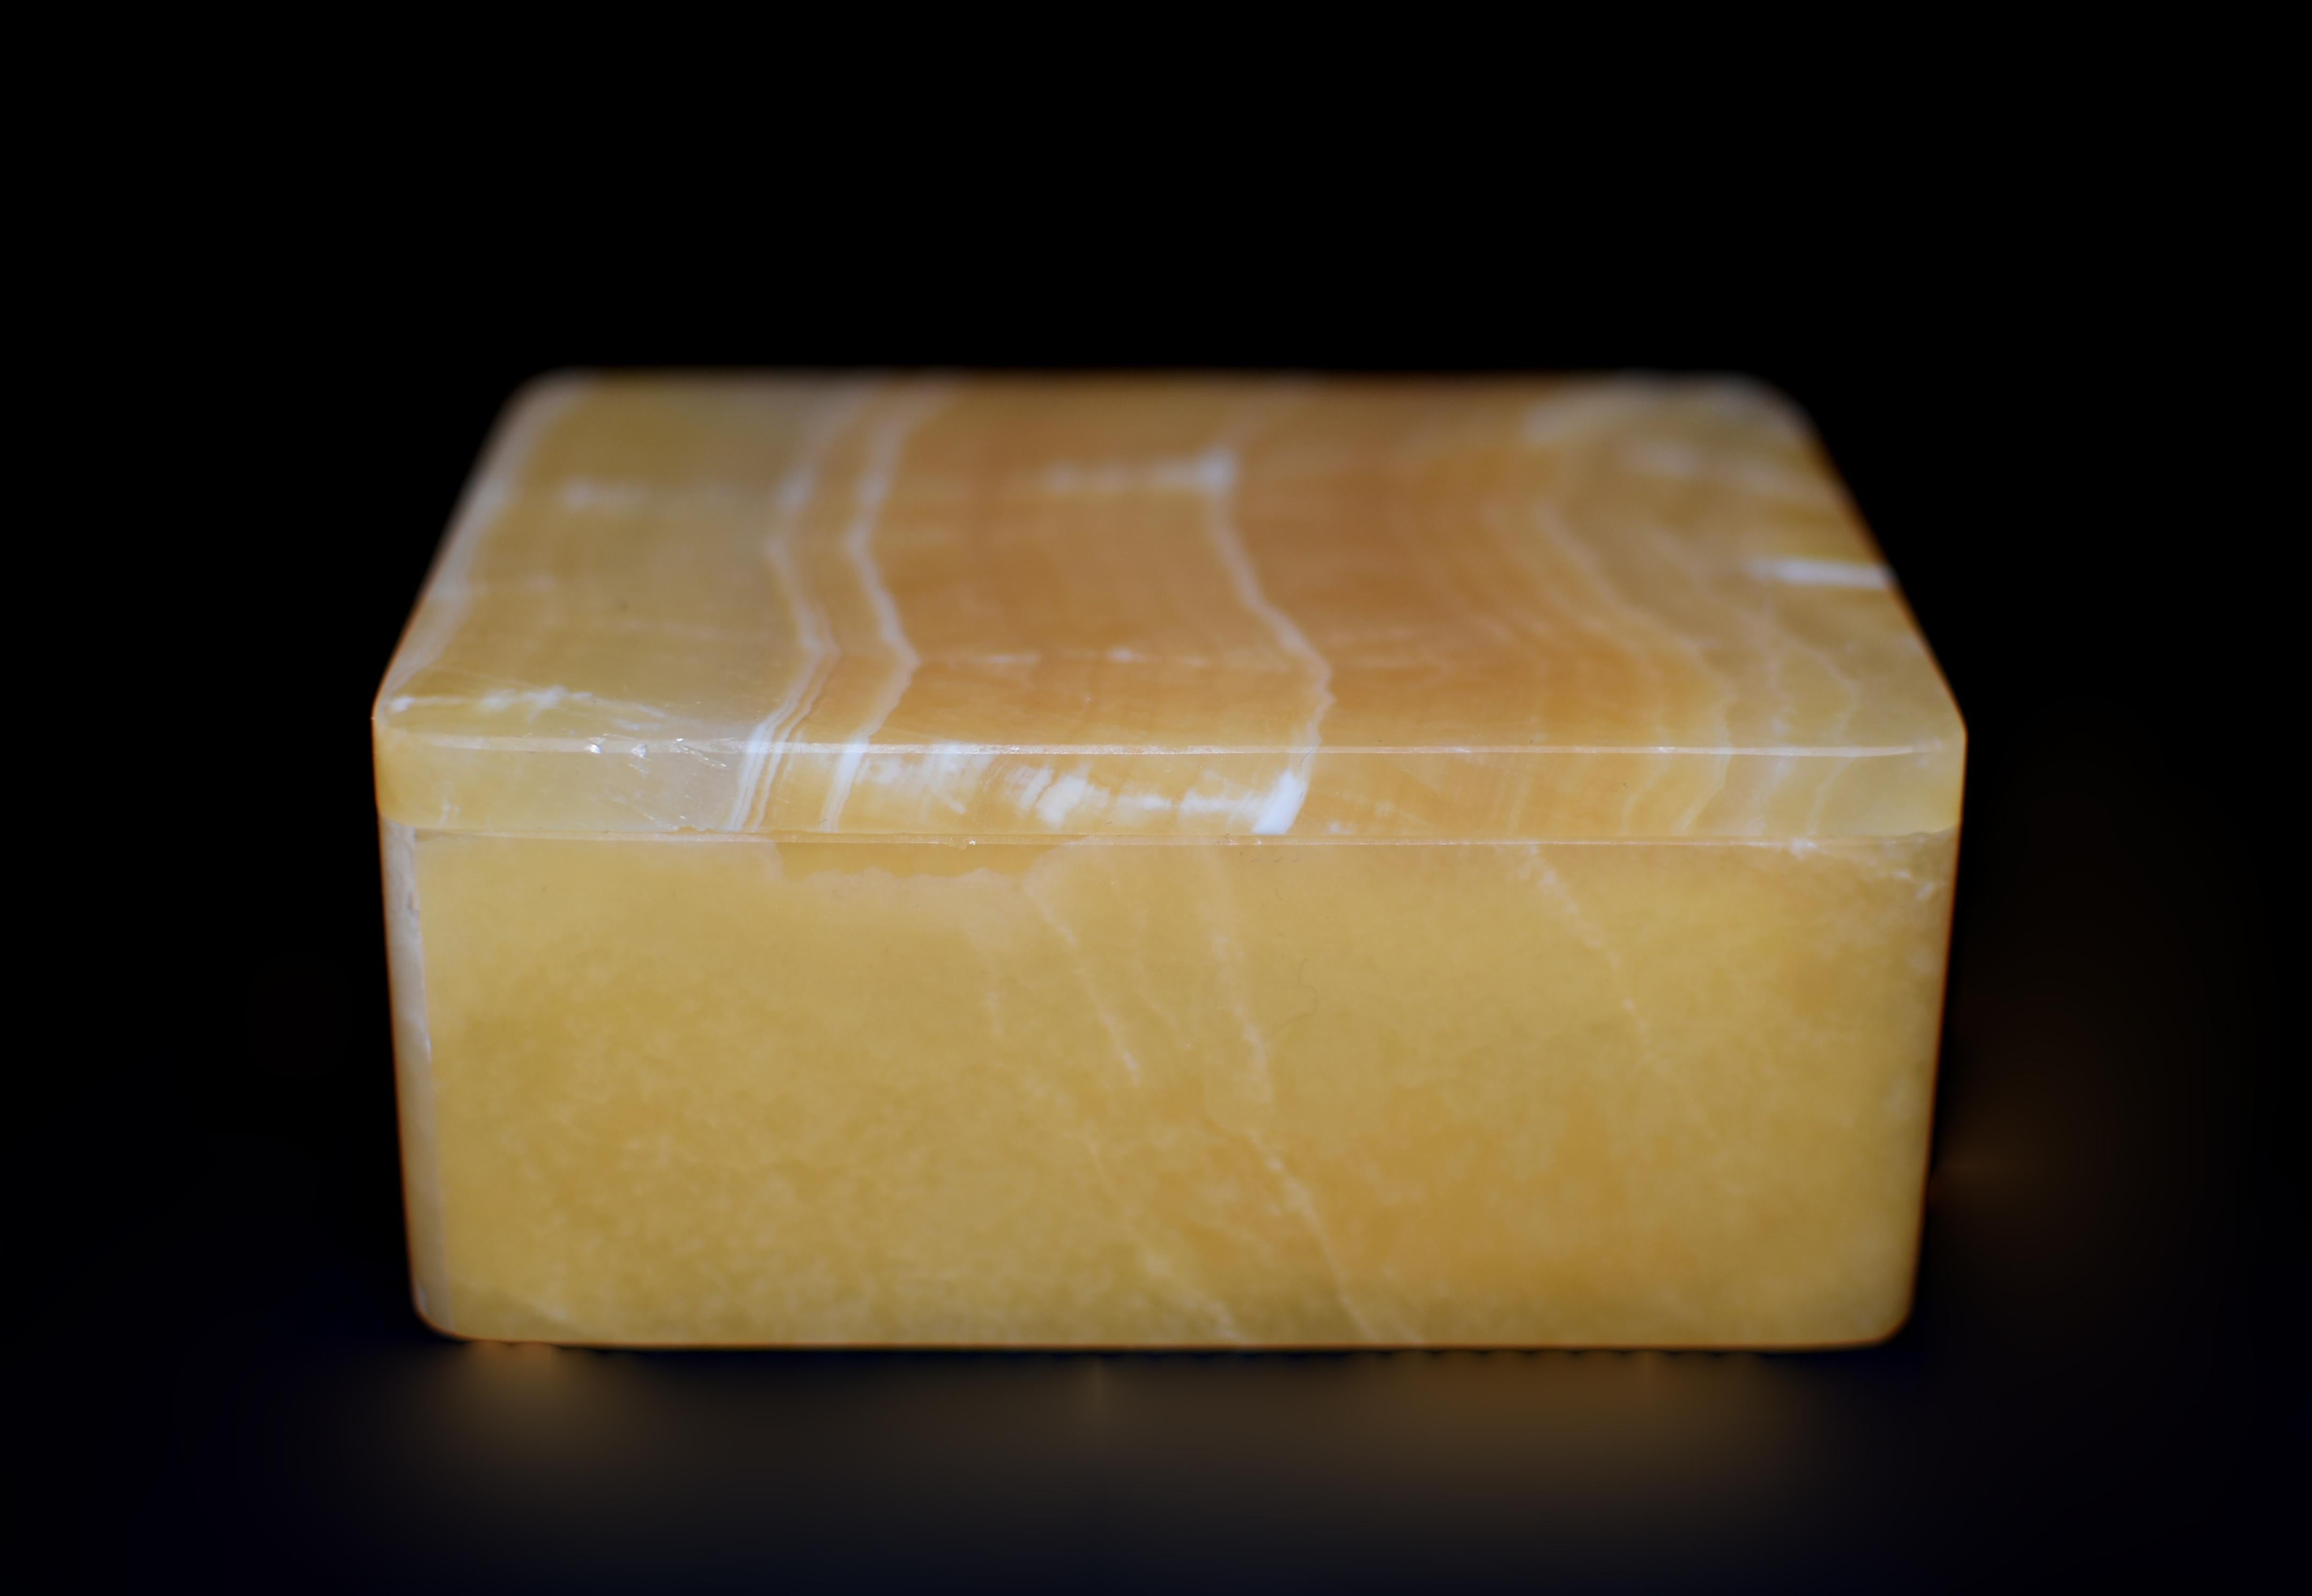 This exquisite 1.2-lb creation is crafted from the finest rare honey calcite onyx sourced from Pakistan. Hand made by a master artisan in Italy, showcasing beautiful patterns and bands that are distinctively unique to calcite onyx.  Lustrous, warm